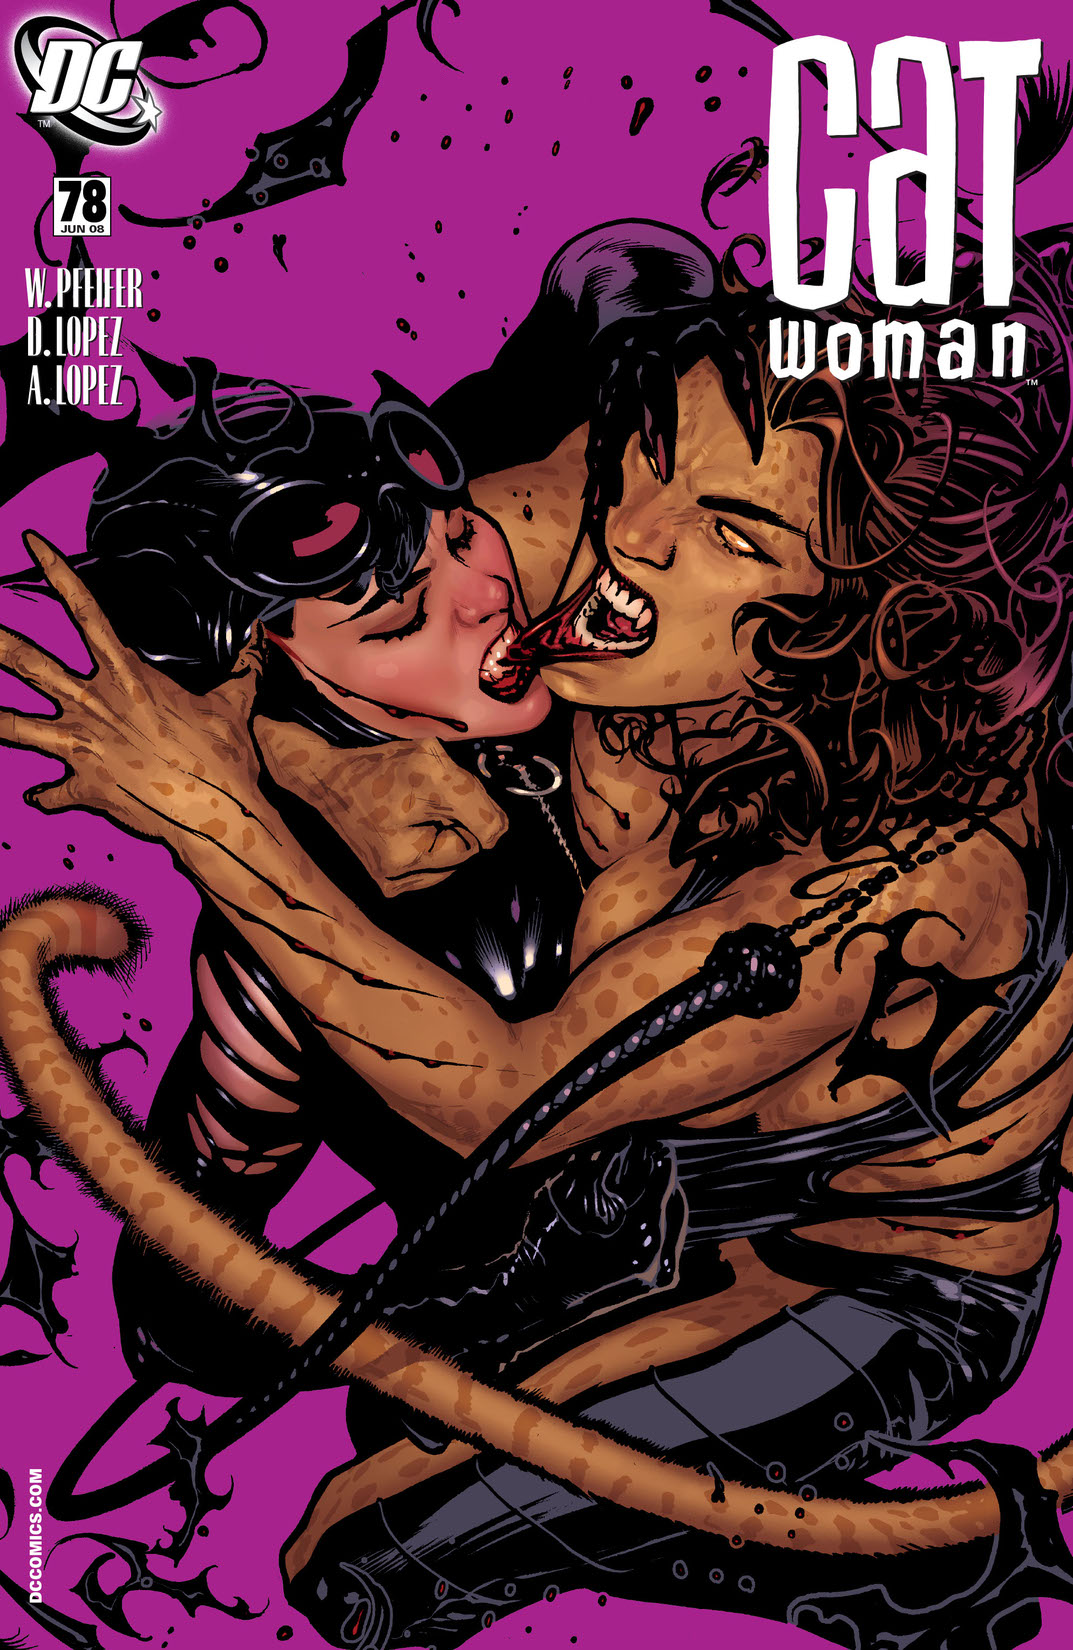 Catwoman (2001-) #78 preview images